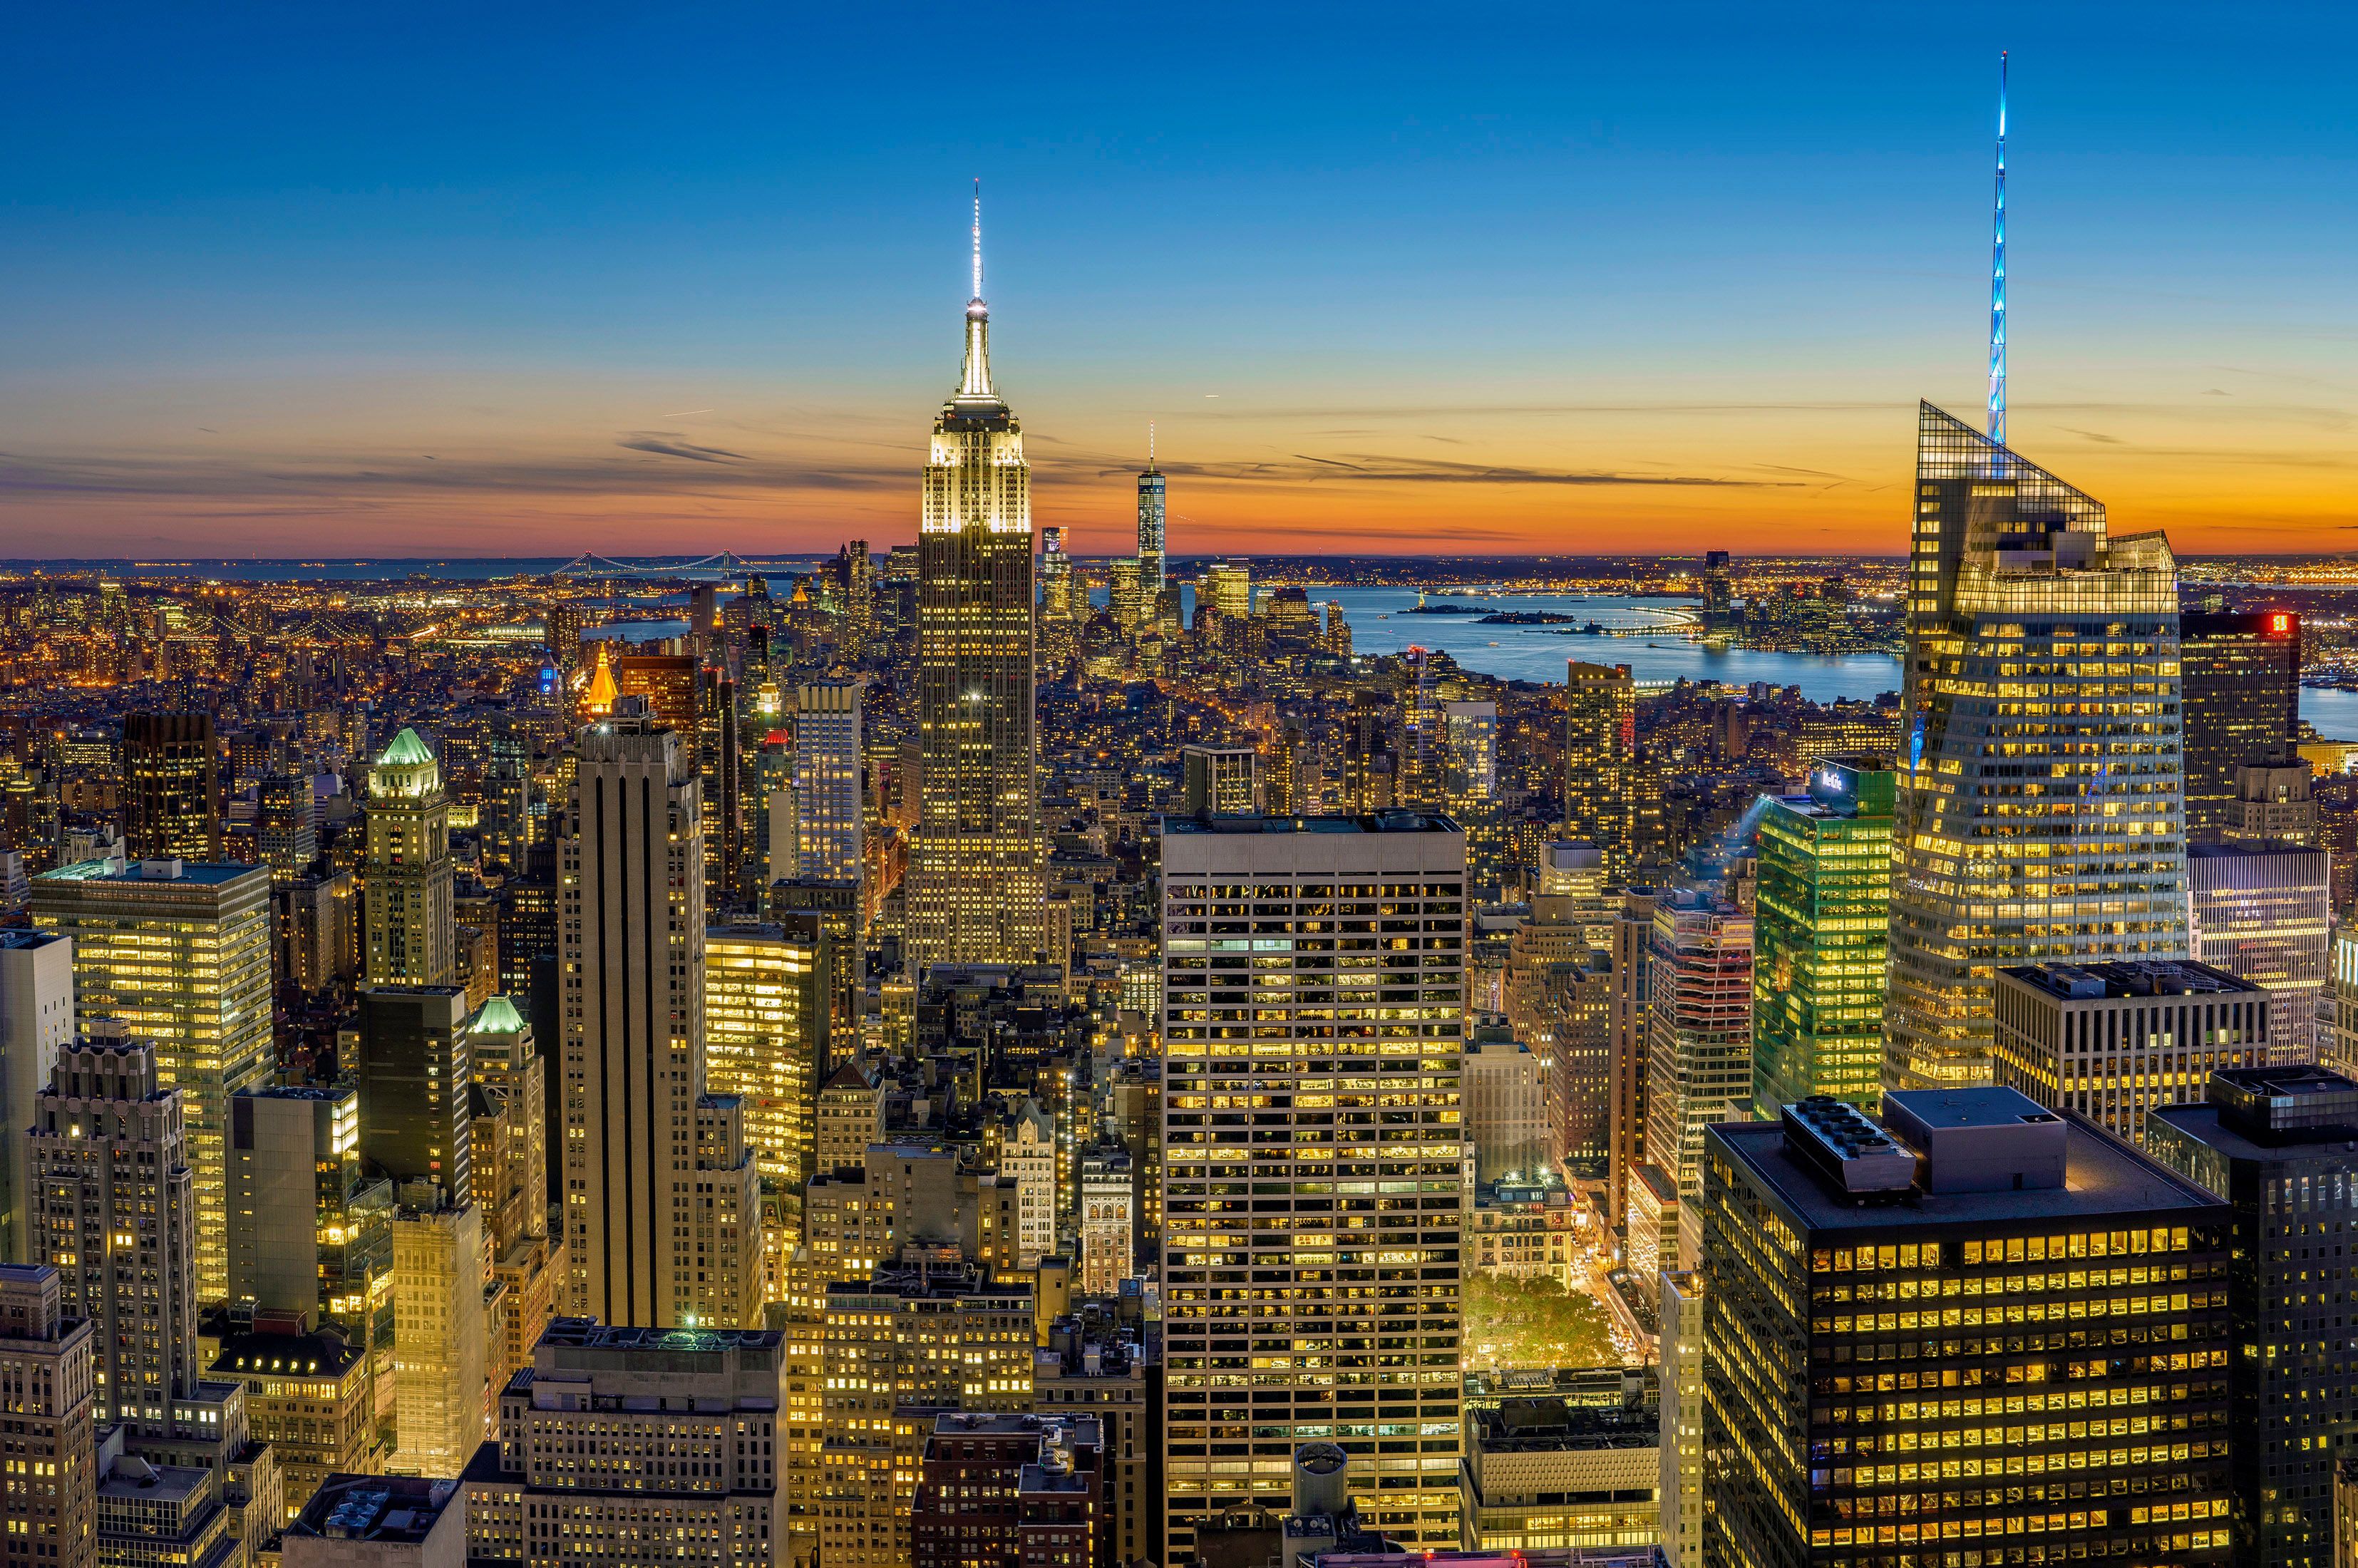 New York Cityscape with lighted up Skyscrapers image - Free stock photo